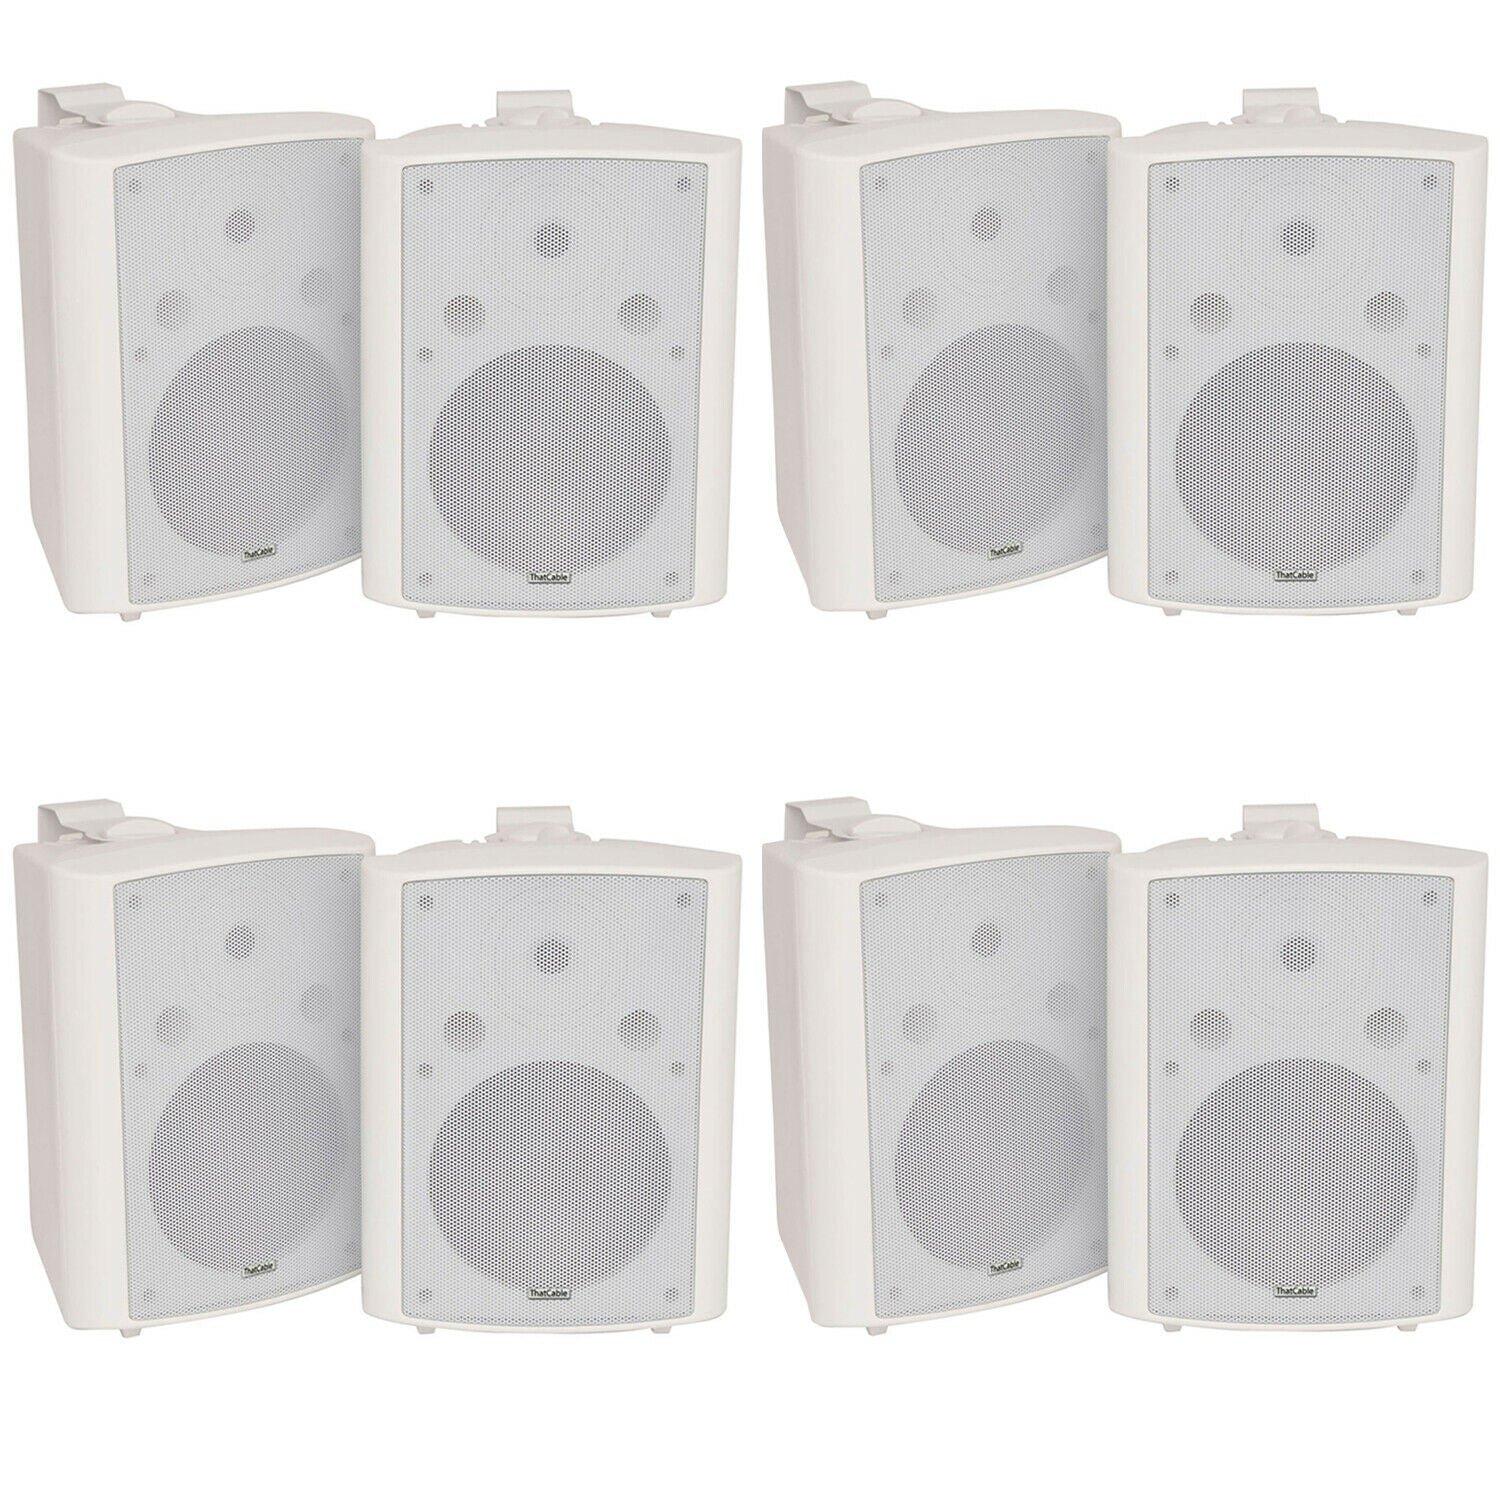 8x 180W White Wall Mounted Stereo Speakers 8